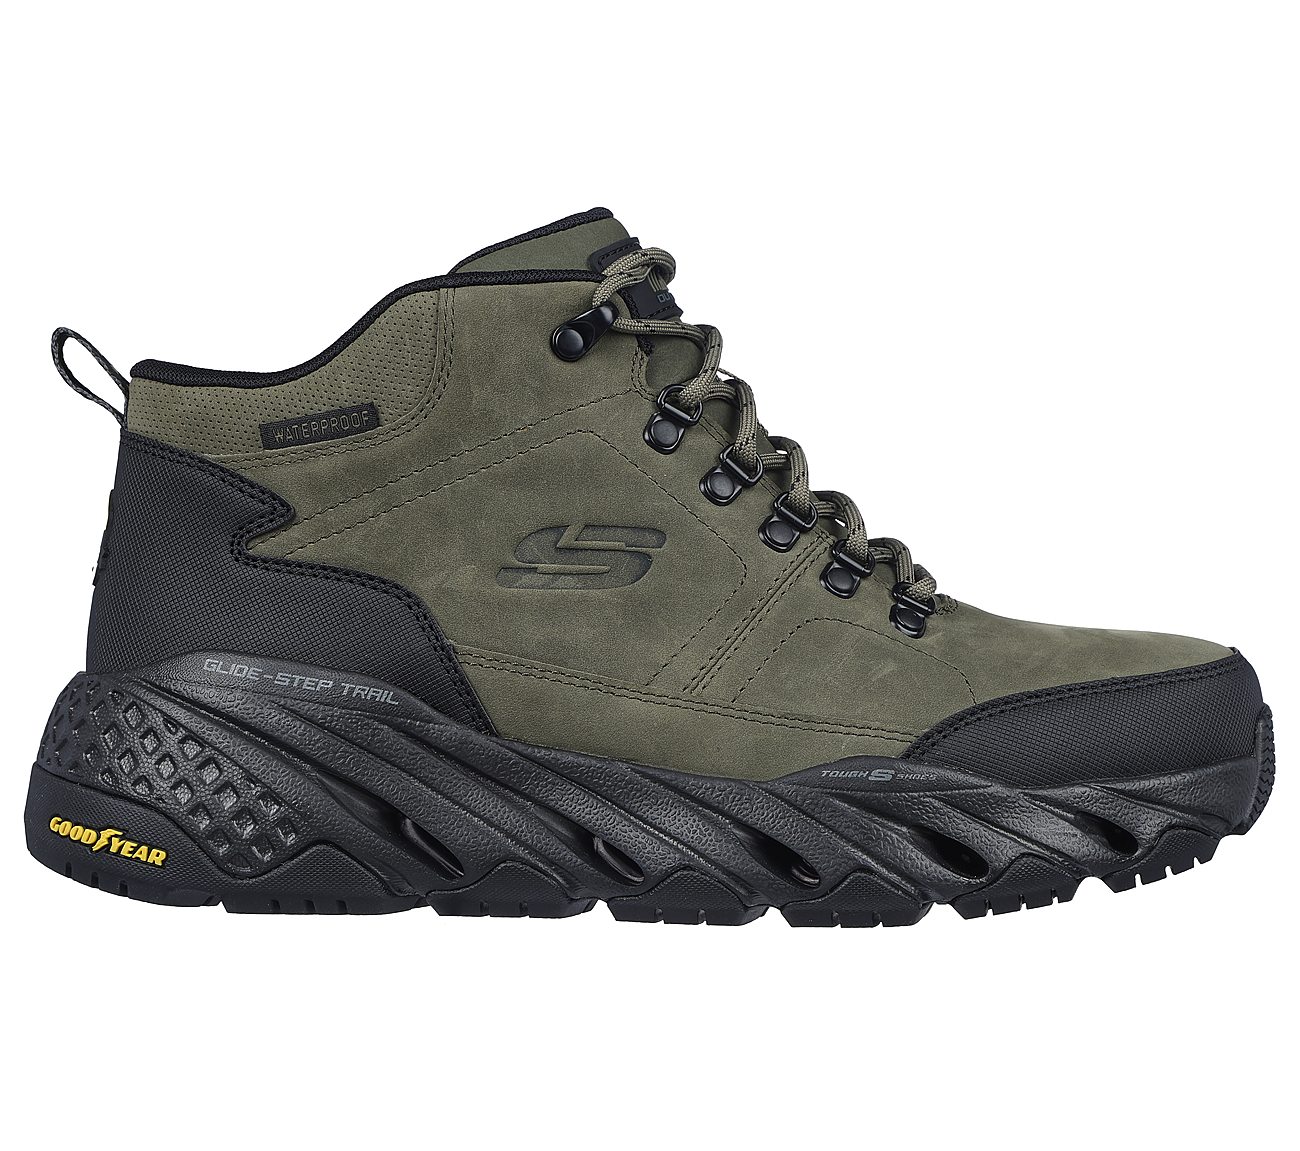 GLIDE-STEP TRAIL, OLIVE/BLACK Footwear Lateral View